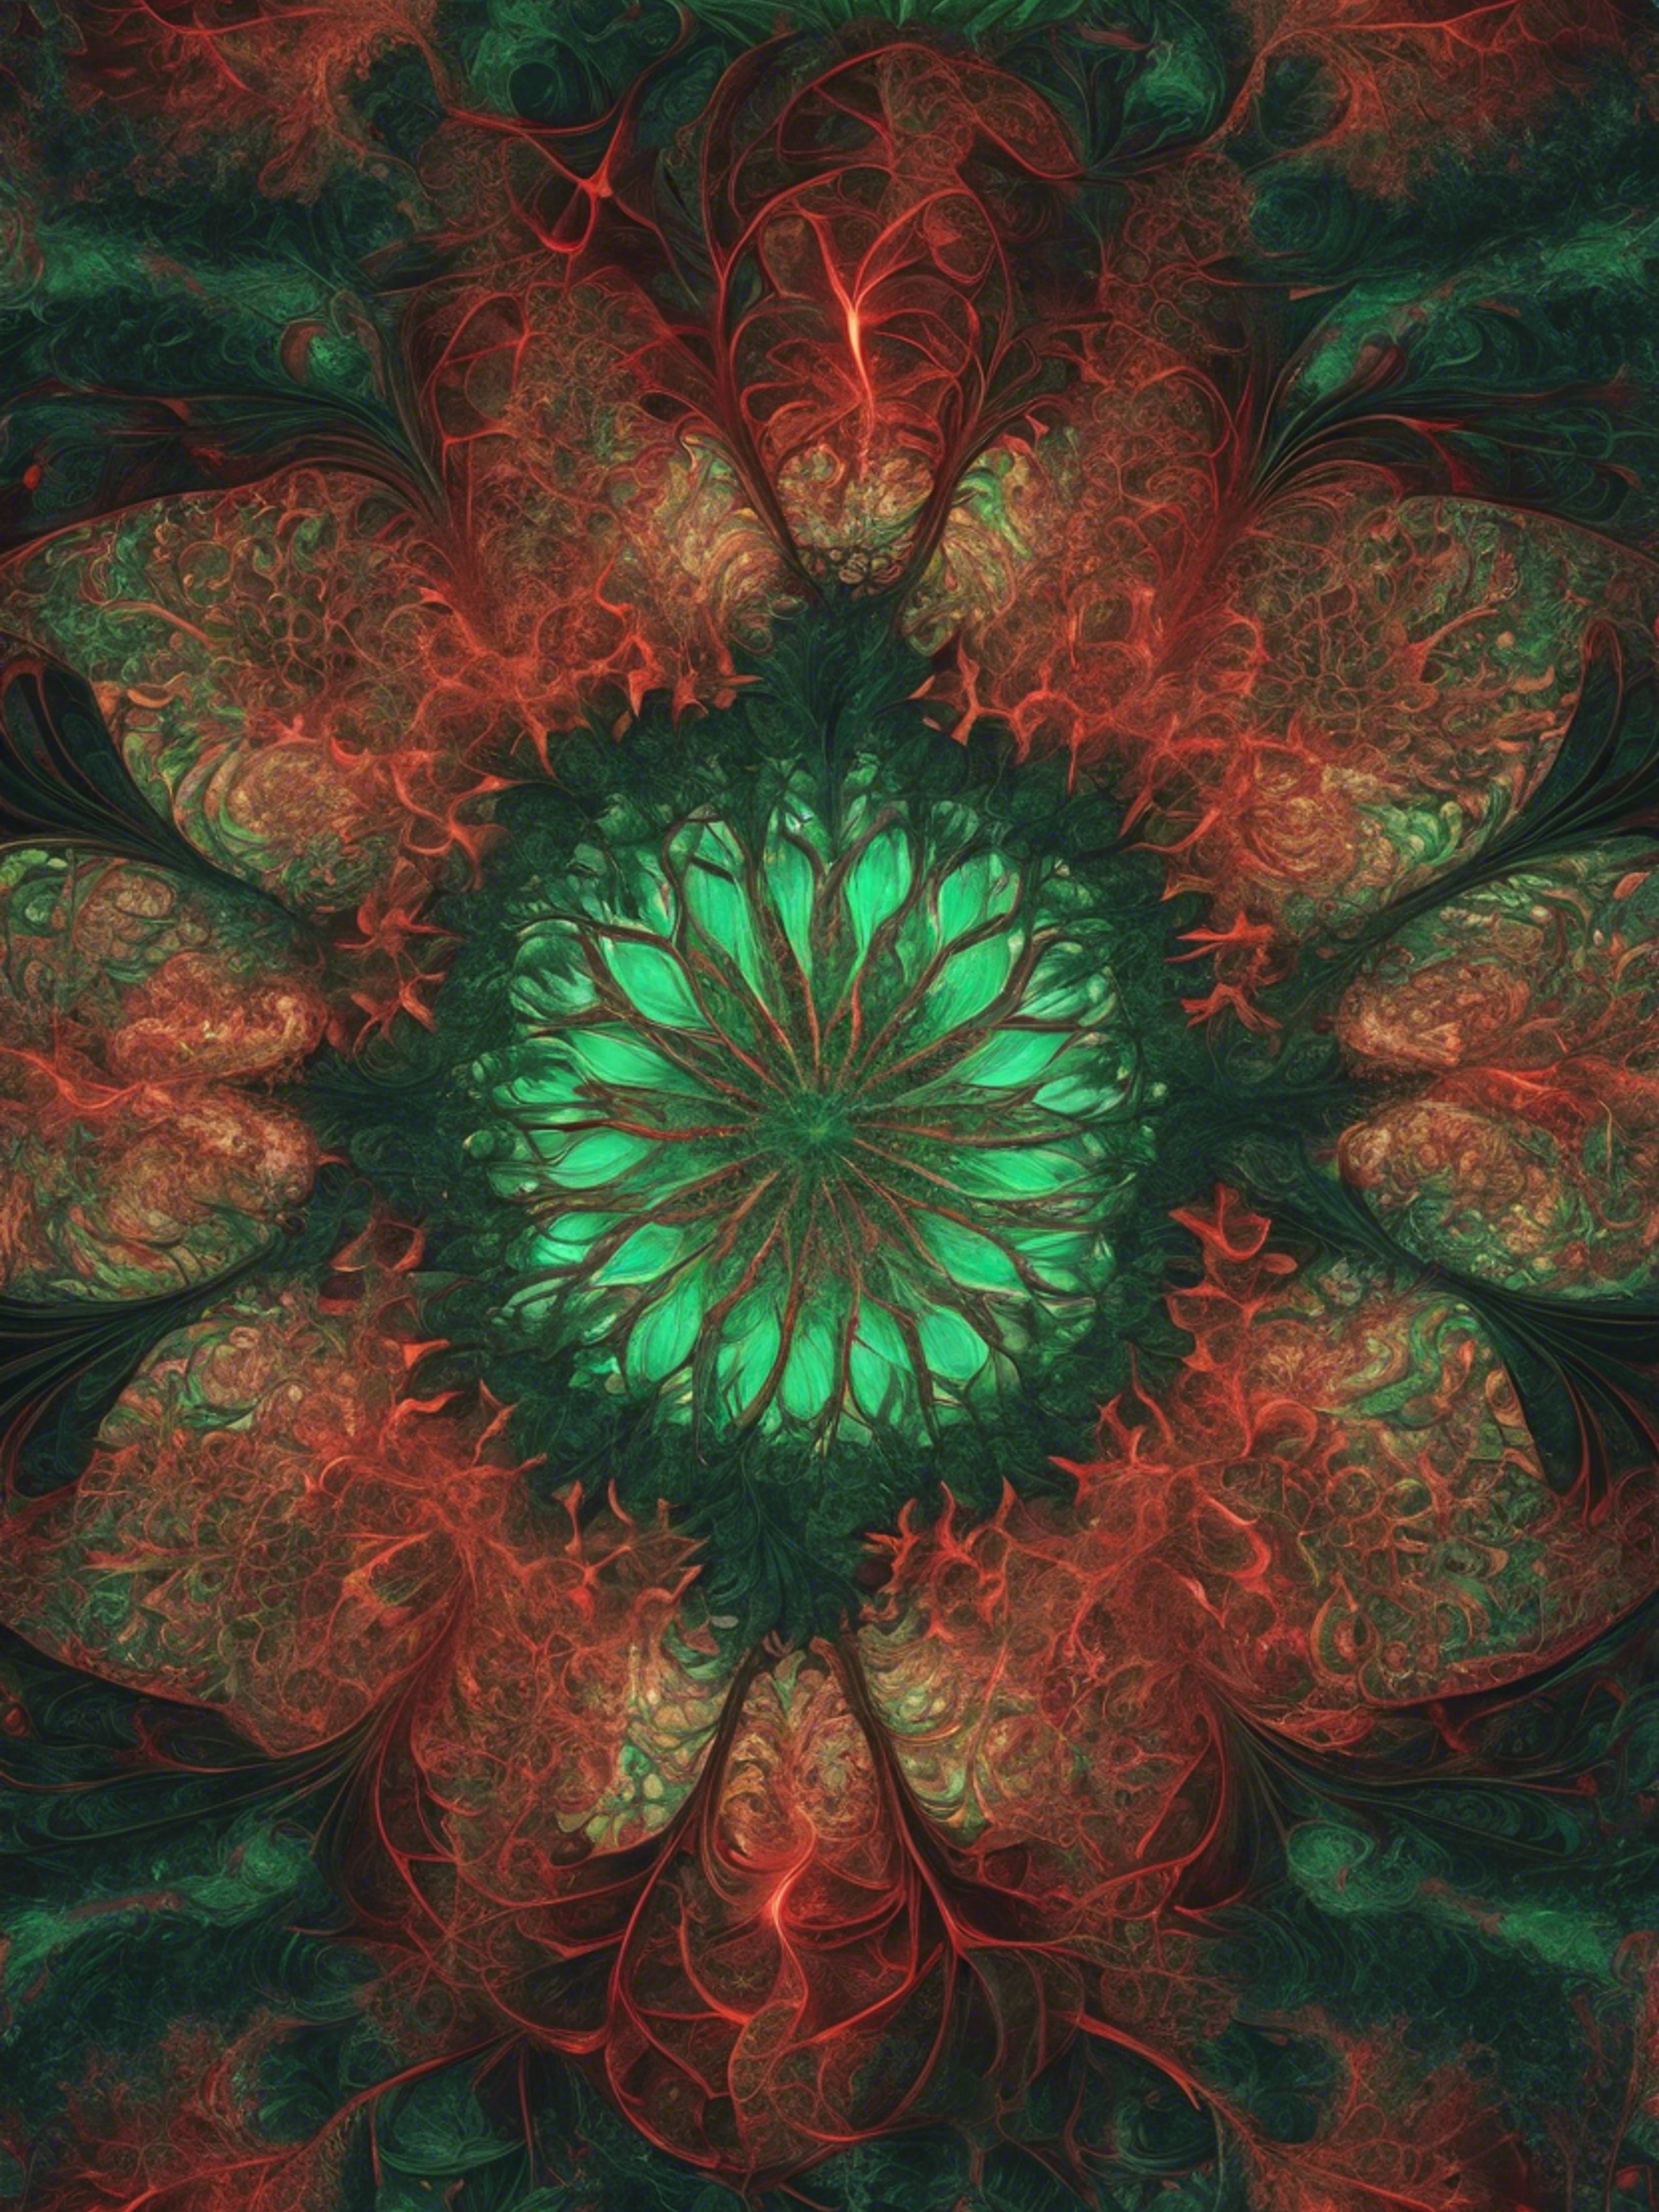 Intricate fractal patterns composed of alternating red and green hues壁紙[0376ed7744fd4b80a9ab]